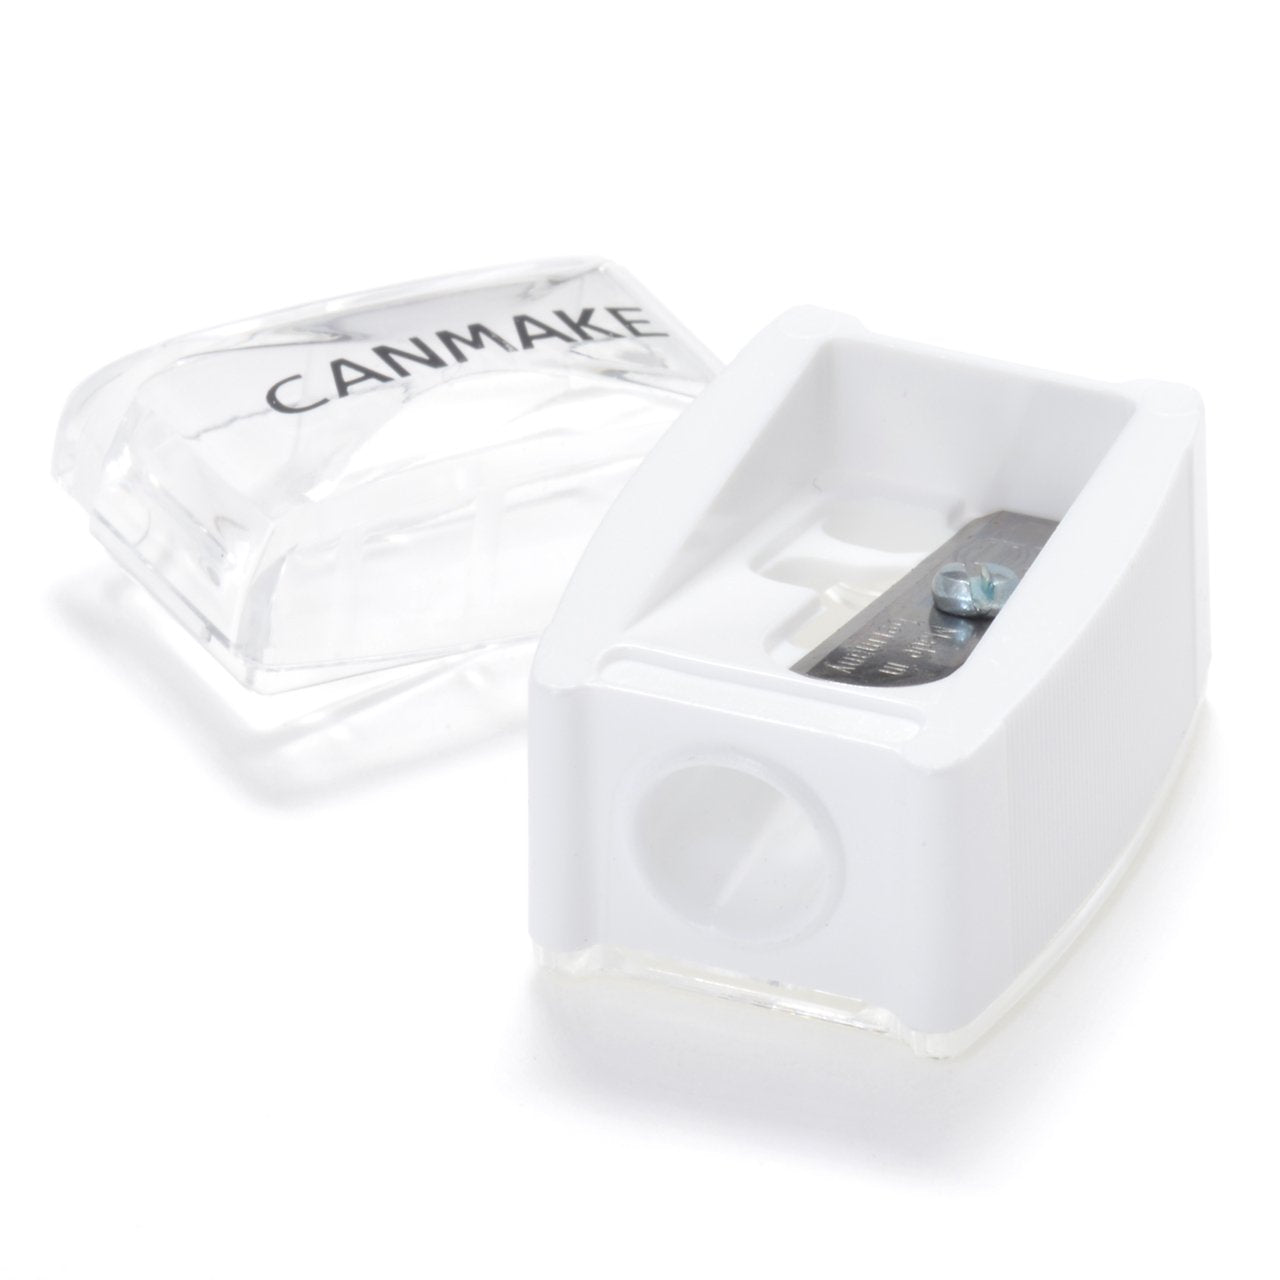 Canmake Pencil Sharpener R - High - Quality Durable Sharpener from Canmake